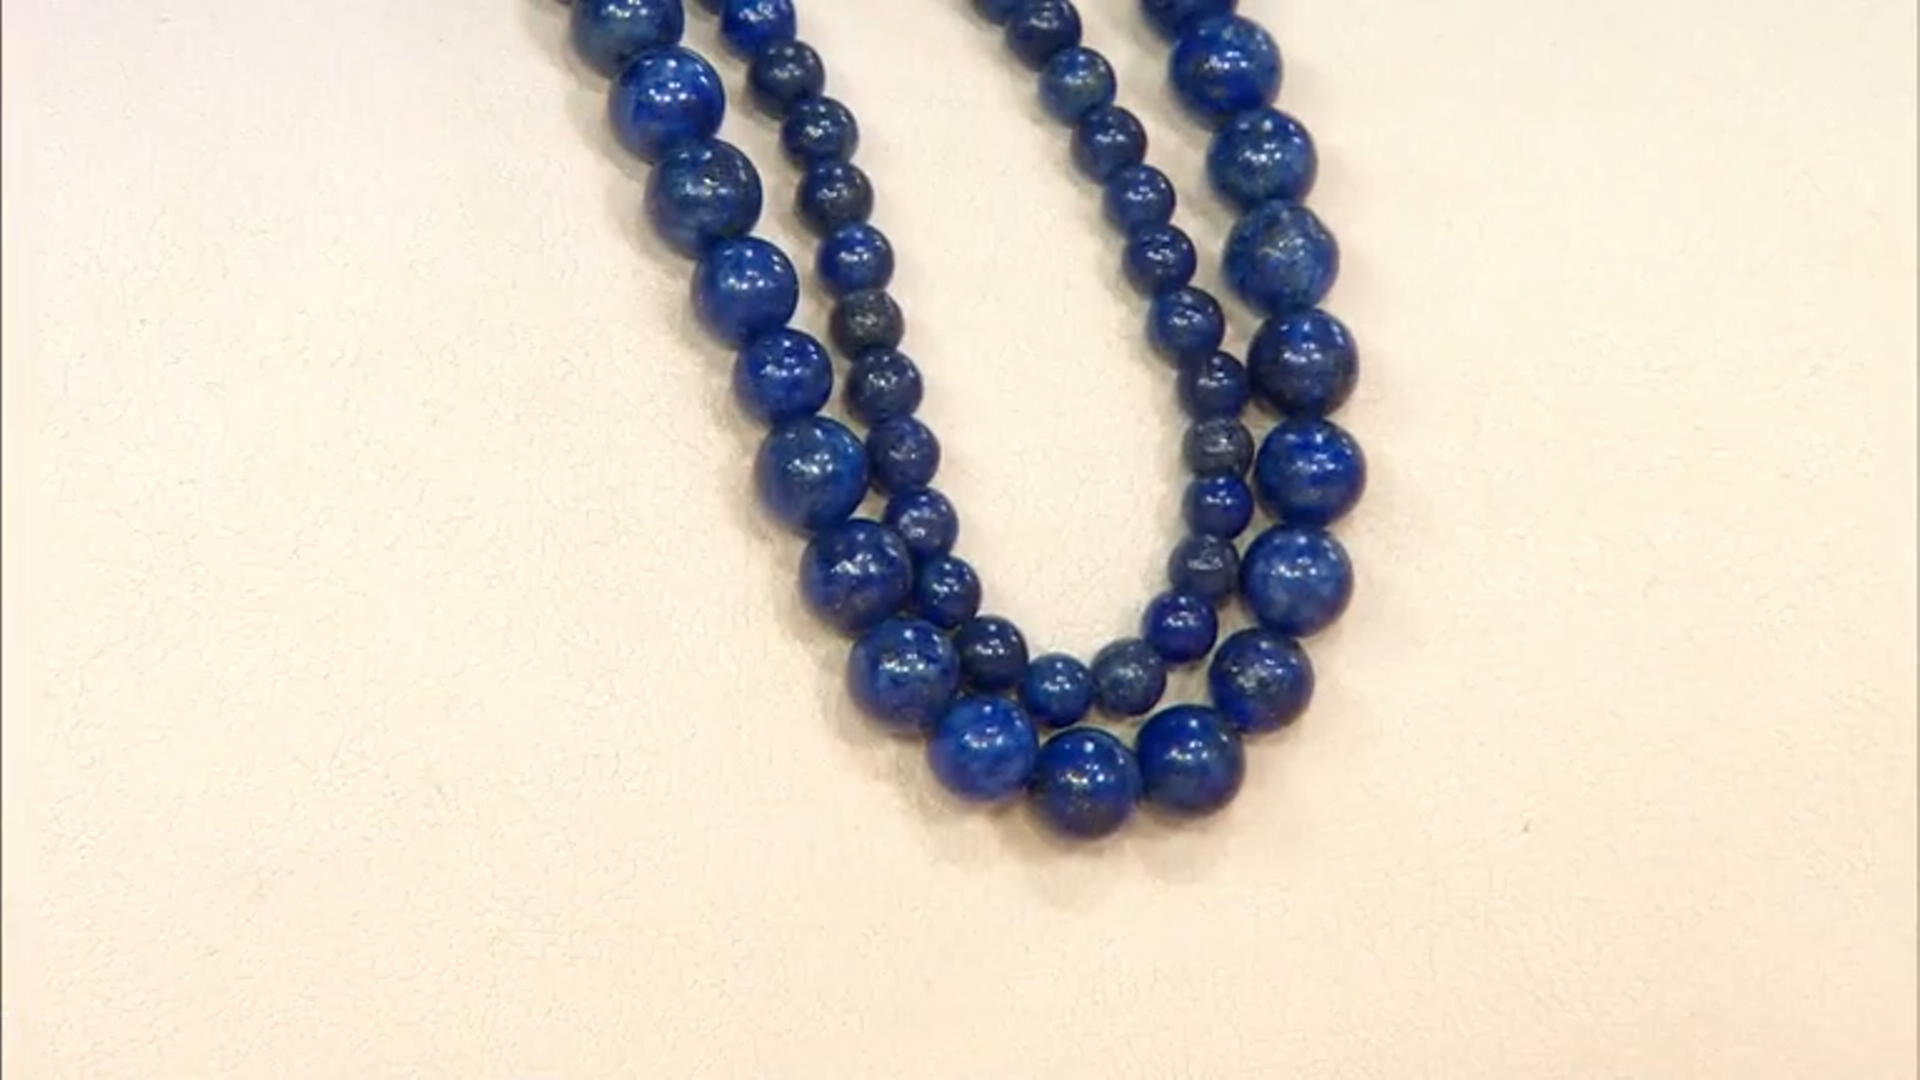 Lapis Lazuli appx 4-6mm Round Bead Strands appx. 14-15.5" Total of 4 Strands Video Thumbnail